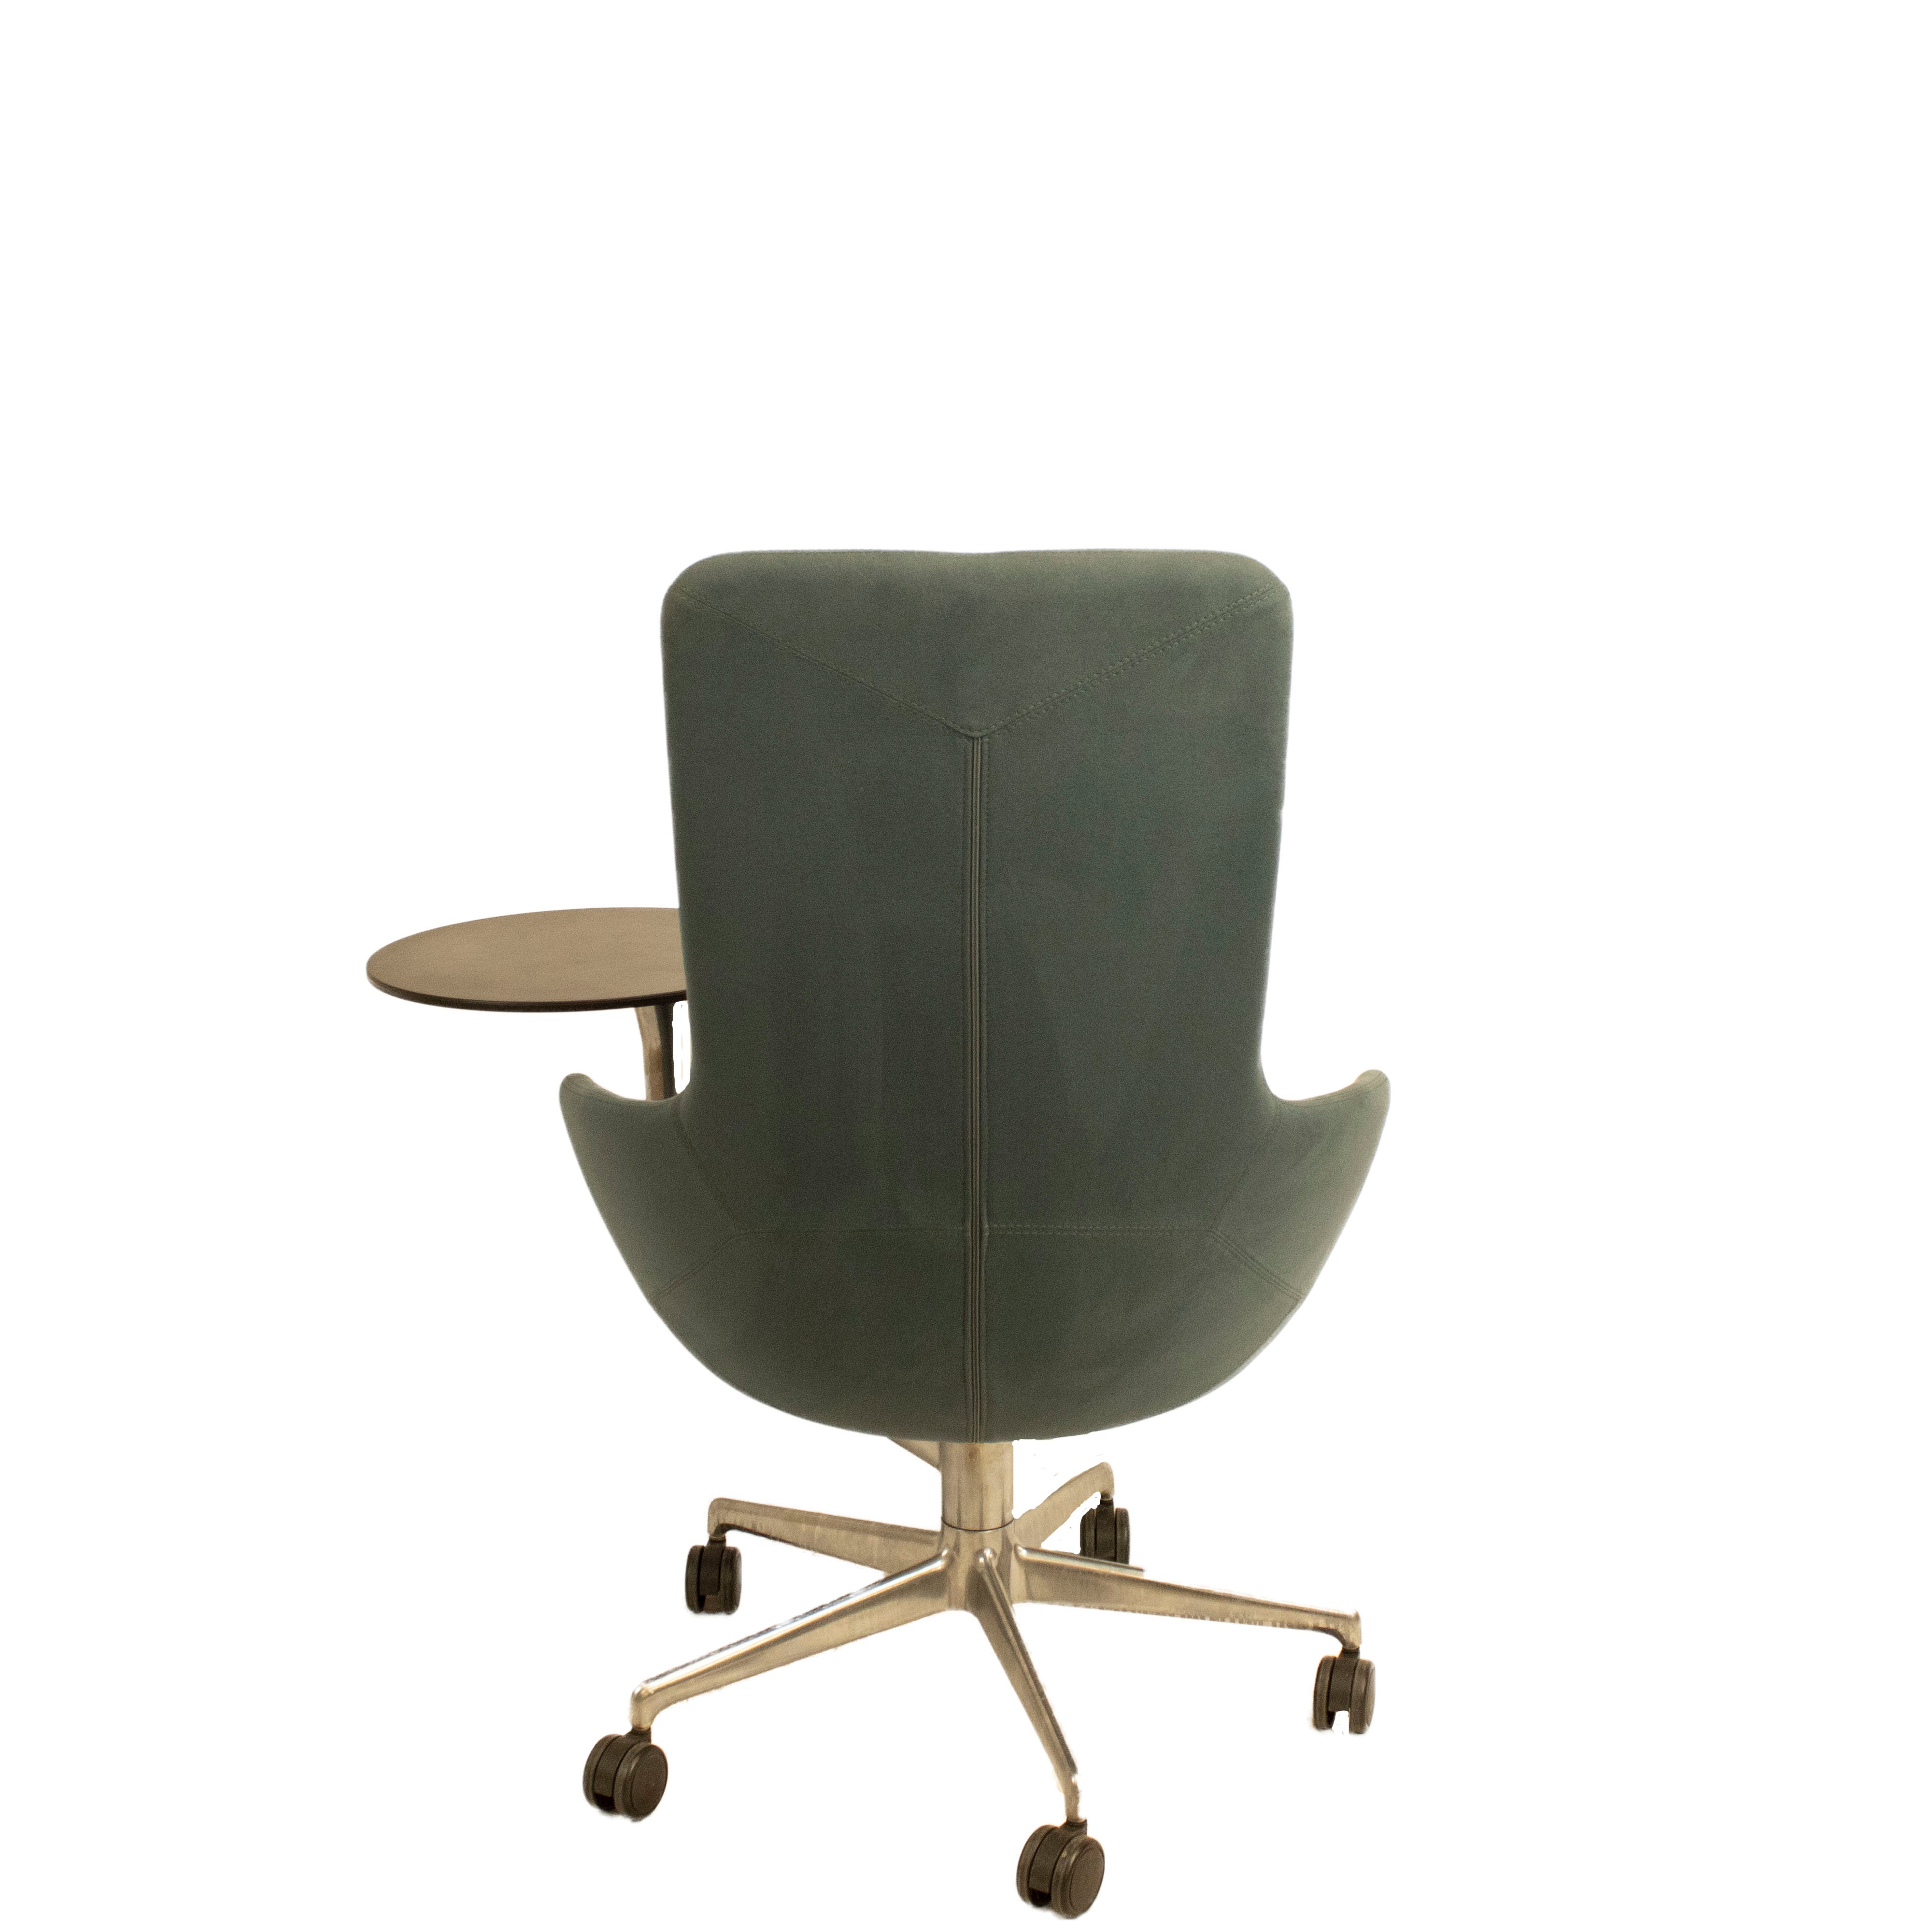 Keilhauer Juxta Lounge Chair - Preowned